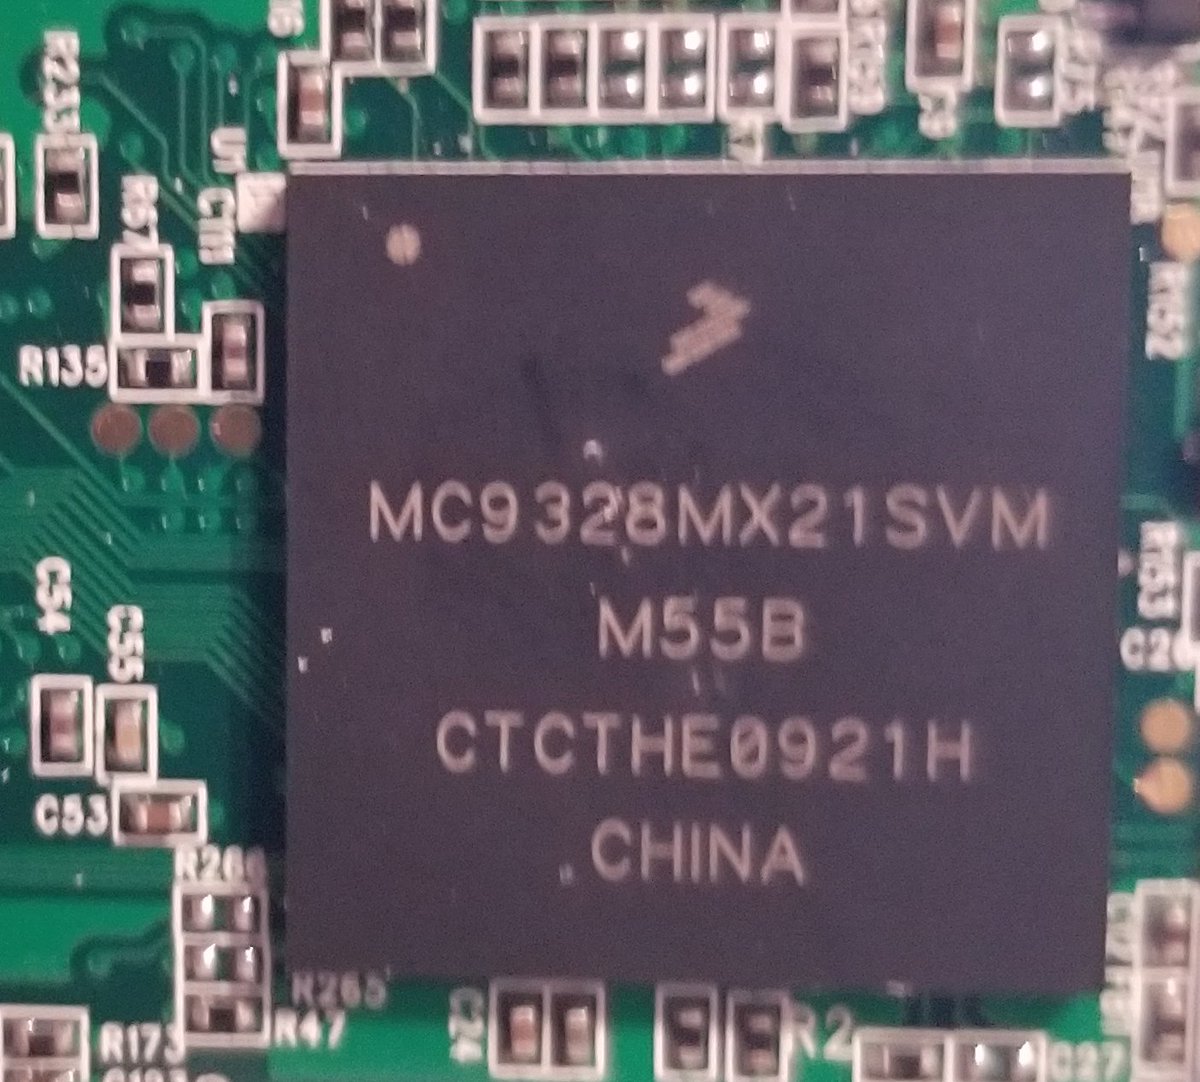 This looks like a CPU! It's an MC9328MX21SVM, that's an Freescale (now NXP) i.MX21 series chip. It's a 32bit ARM9 chip, running at up to 266mhz.